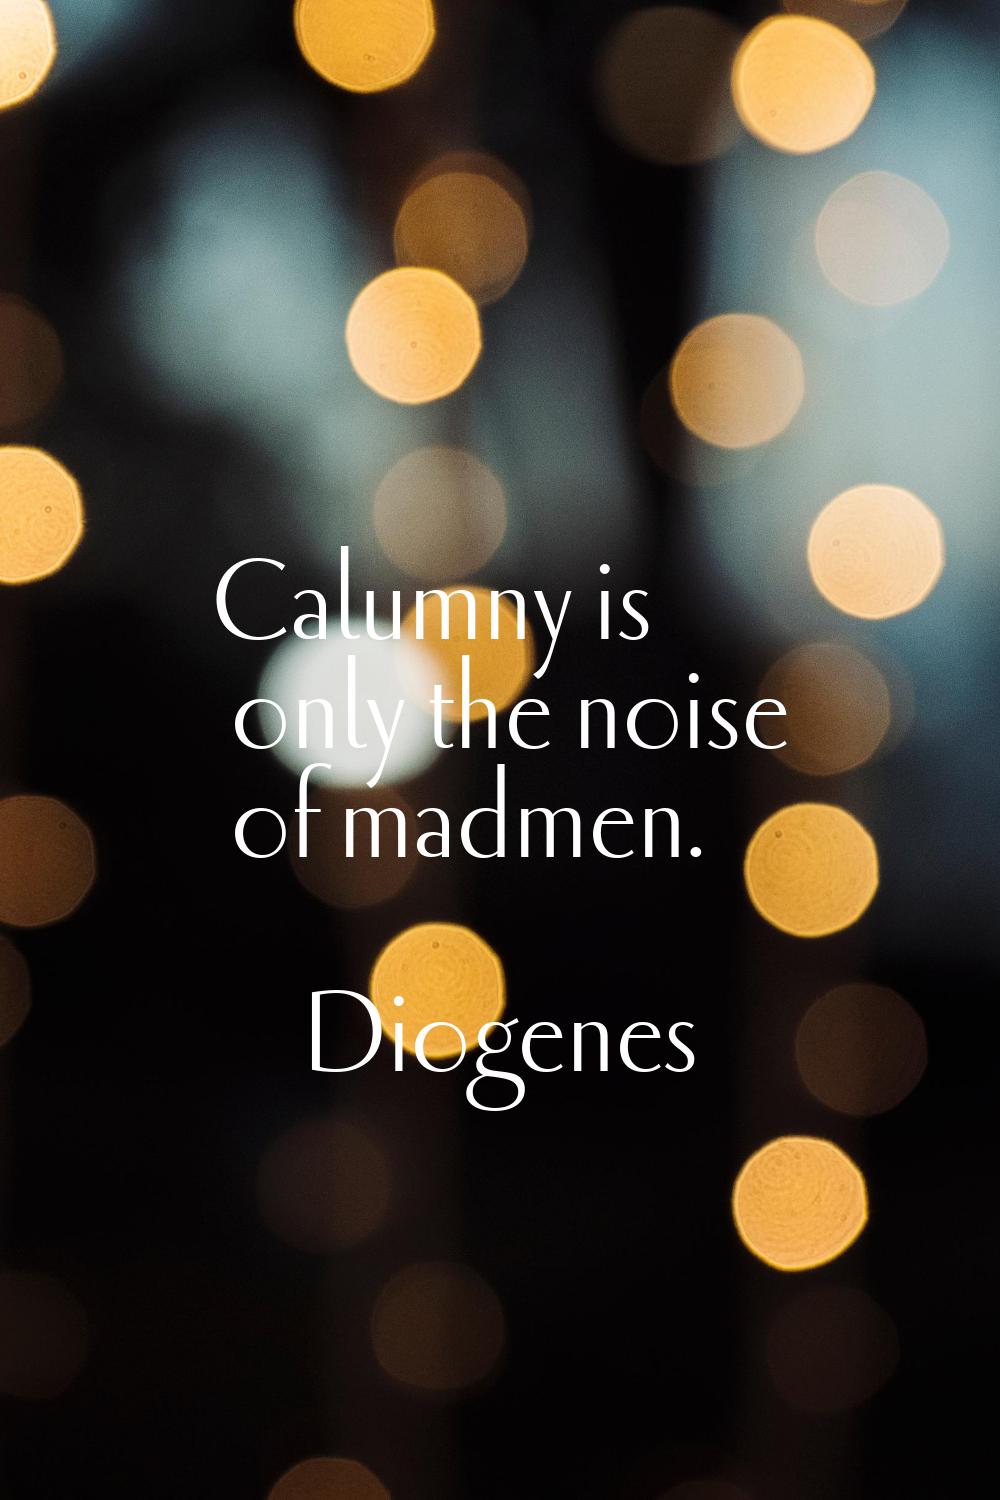 Calumny is only the noise of madmen.